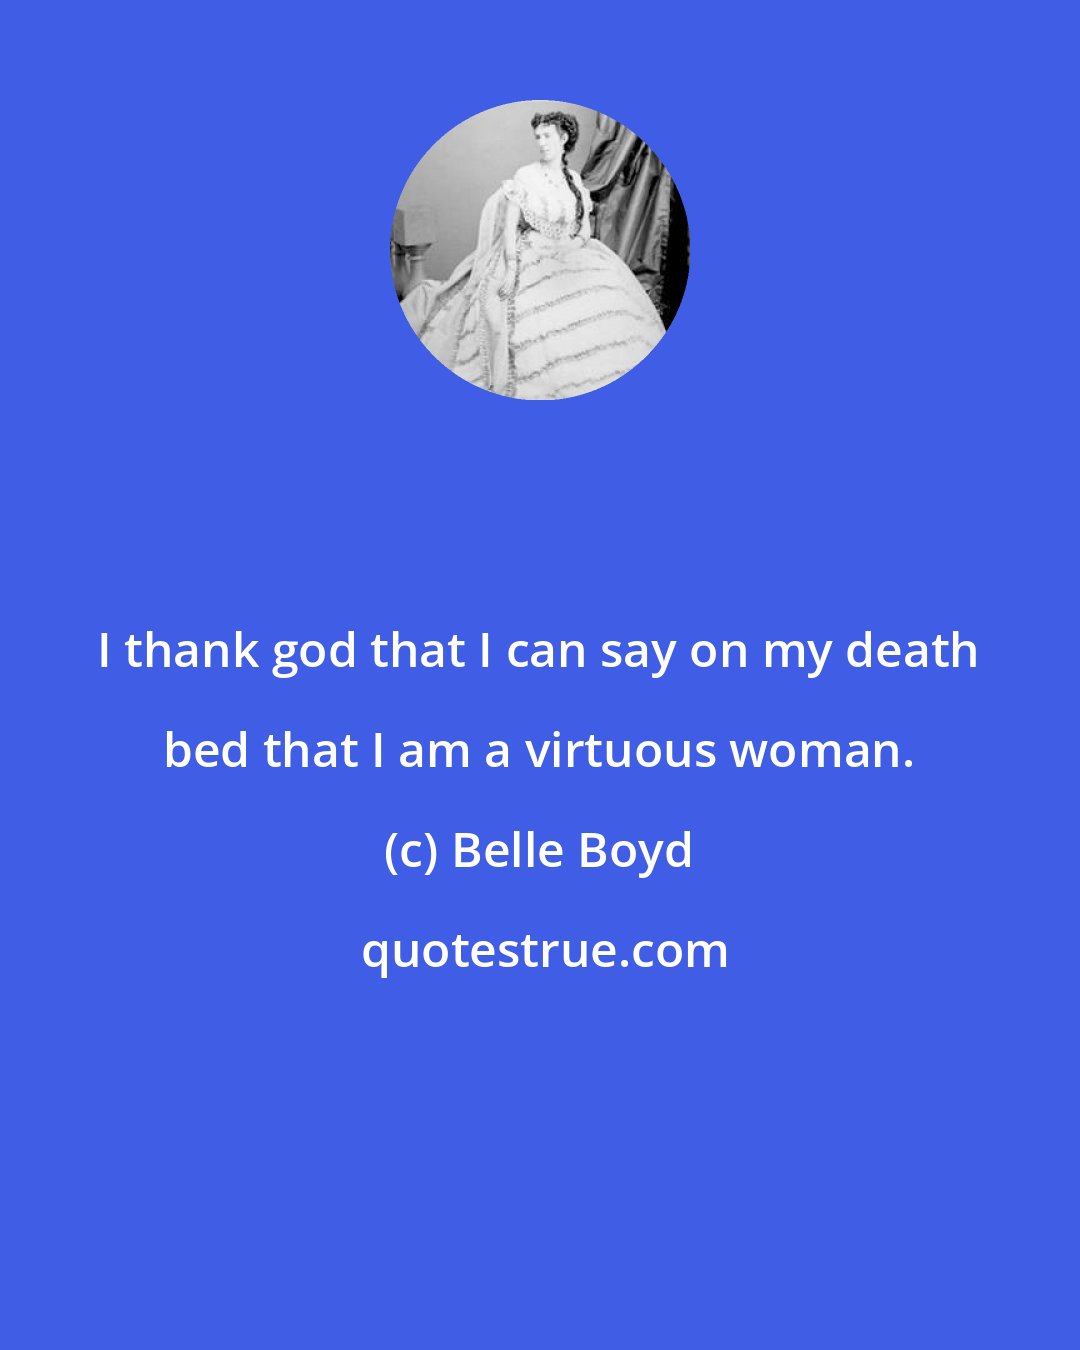 Belle Boyd: I thank god that I can say on my death bed that I am a virtuous woman.